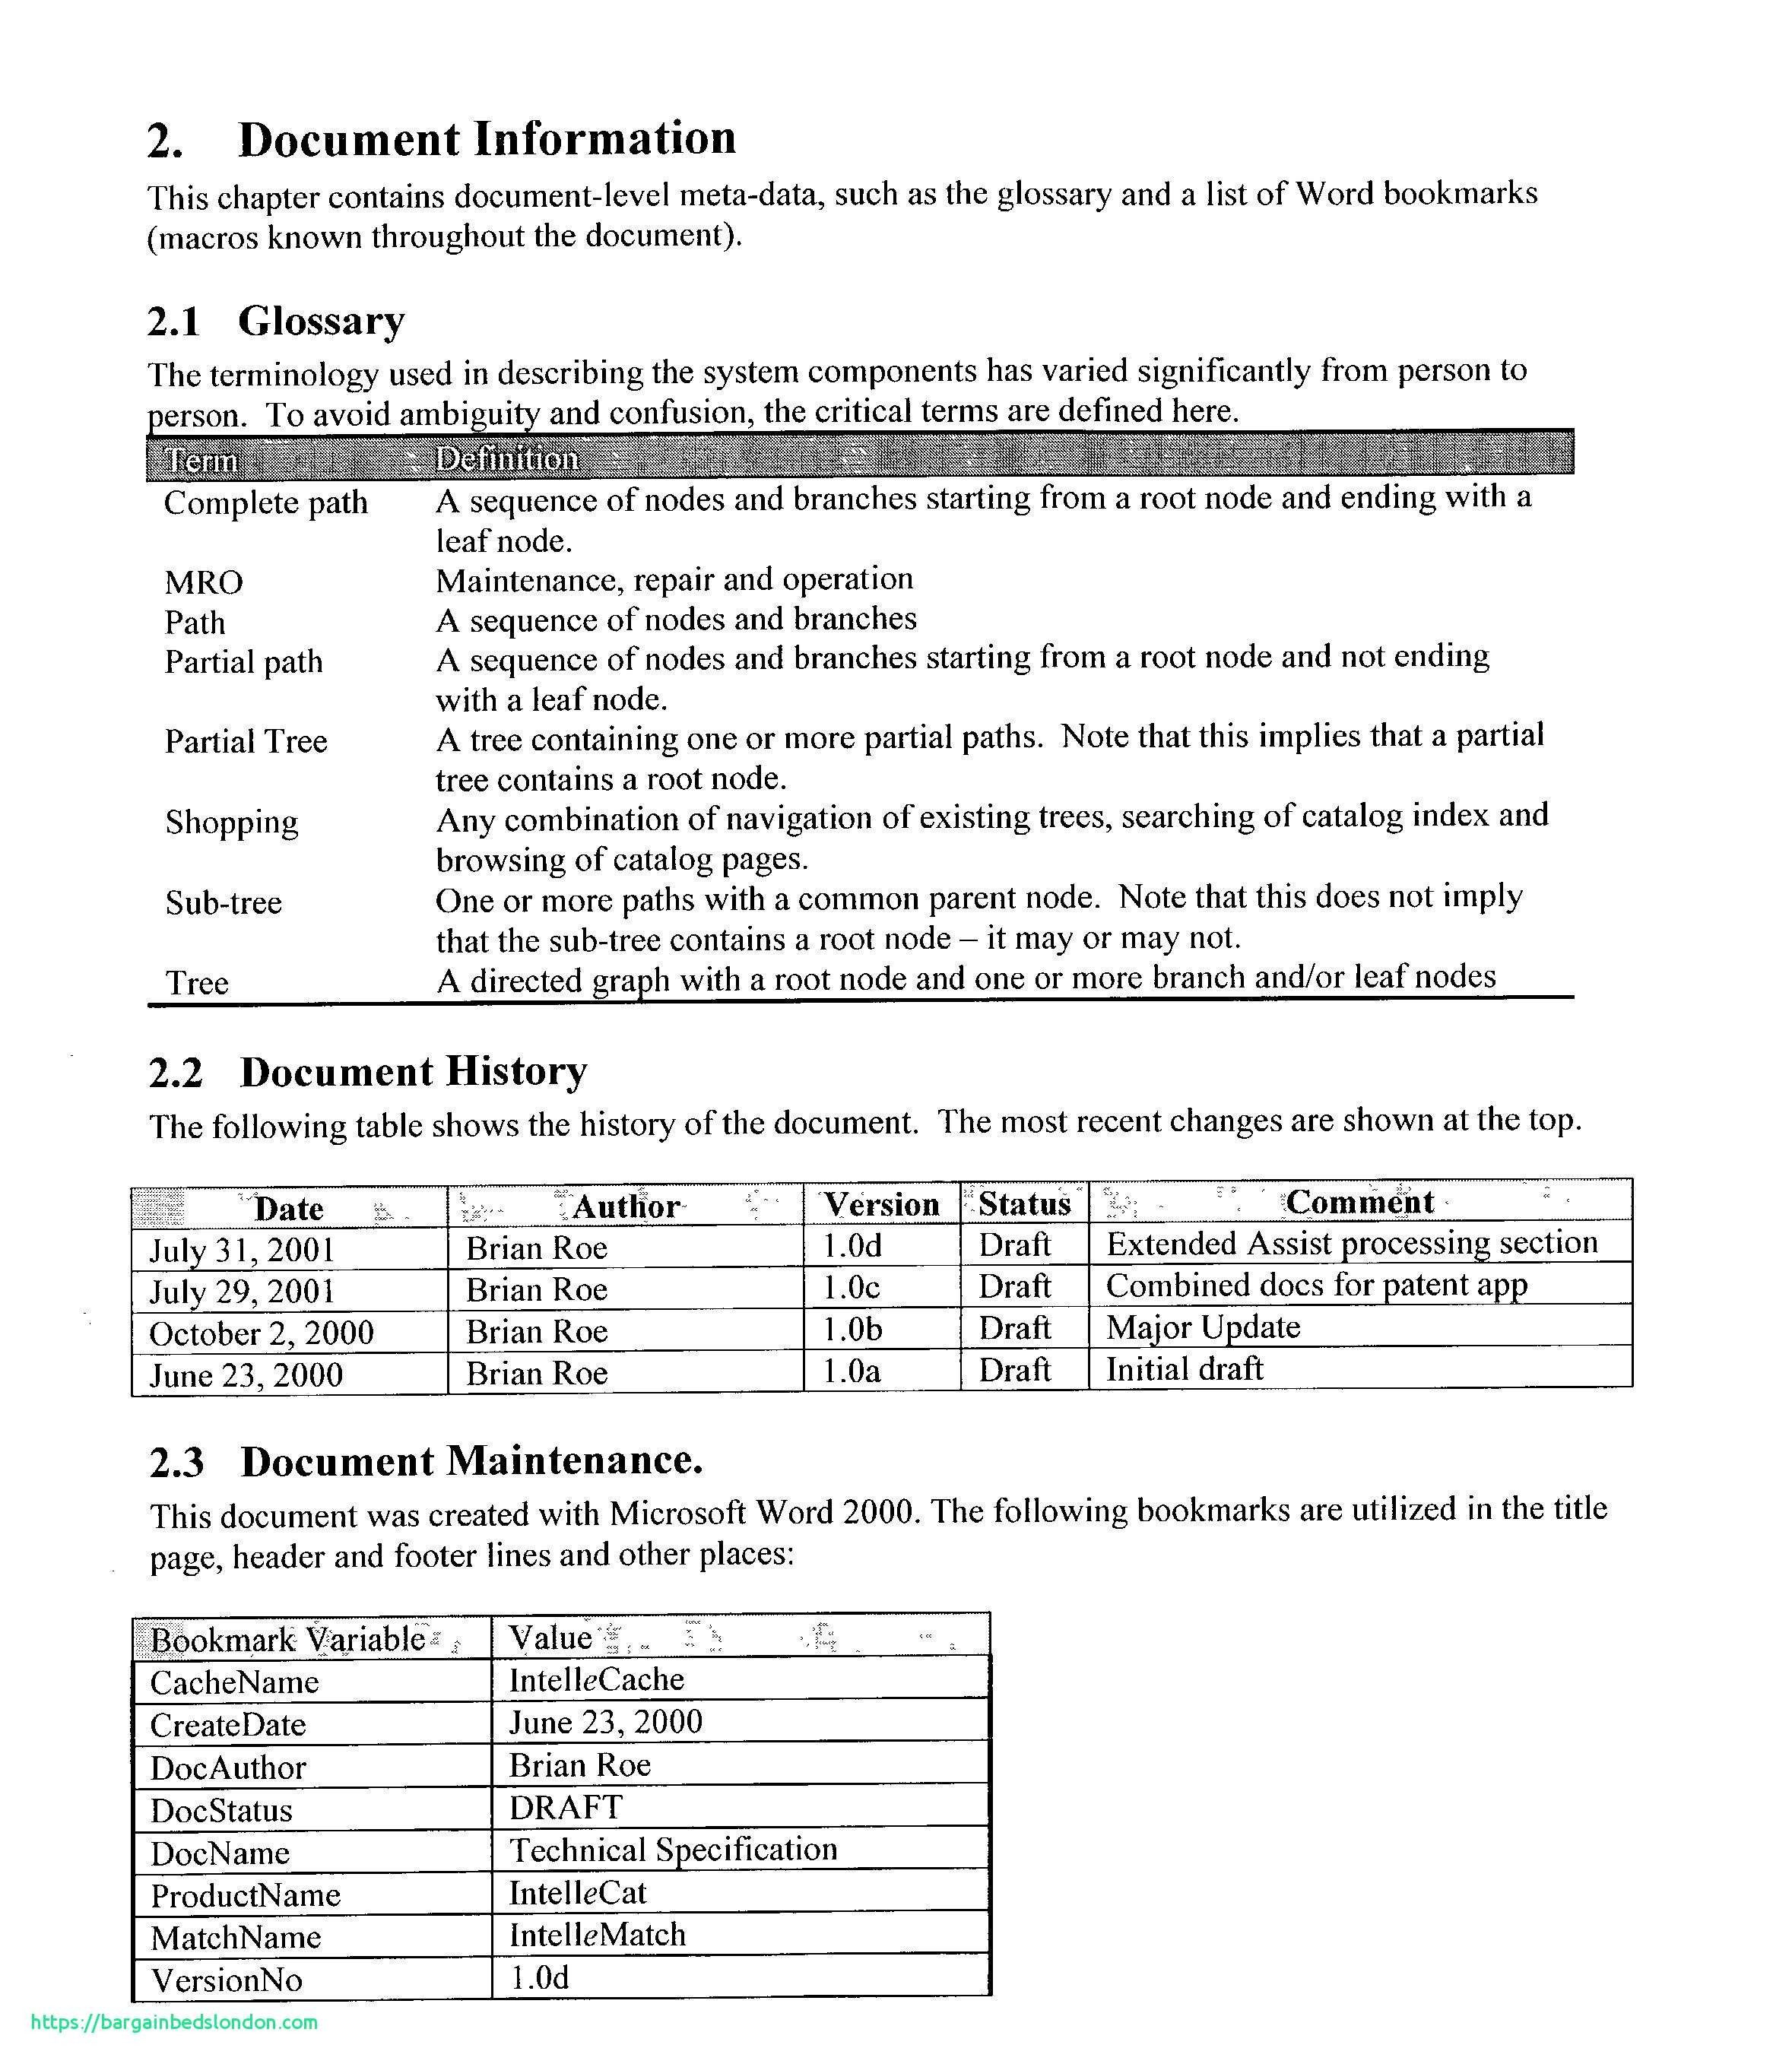 Download Forbes Resume Tips with original resolution Here